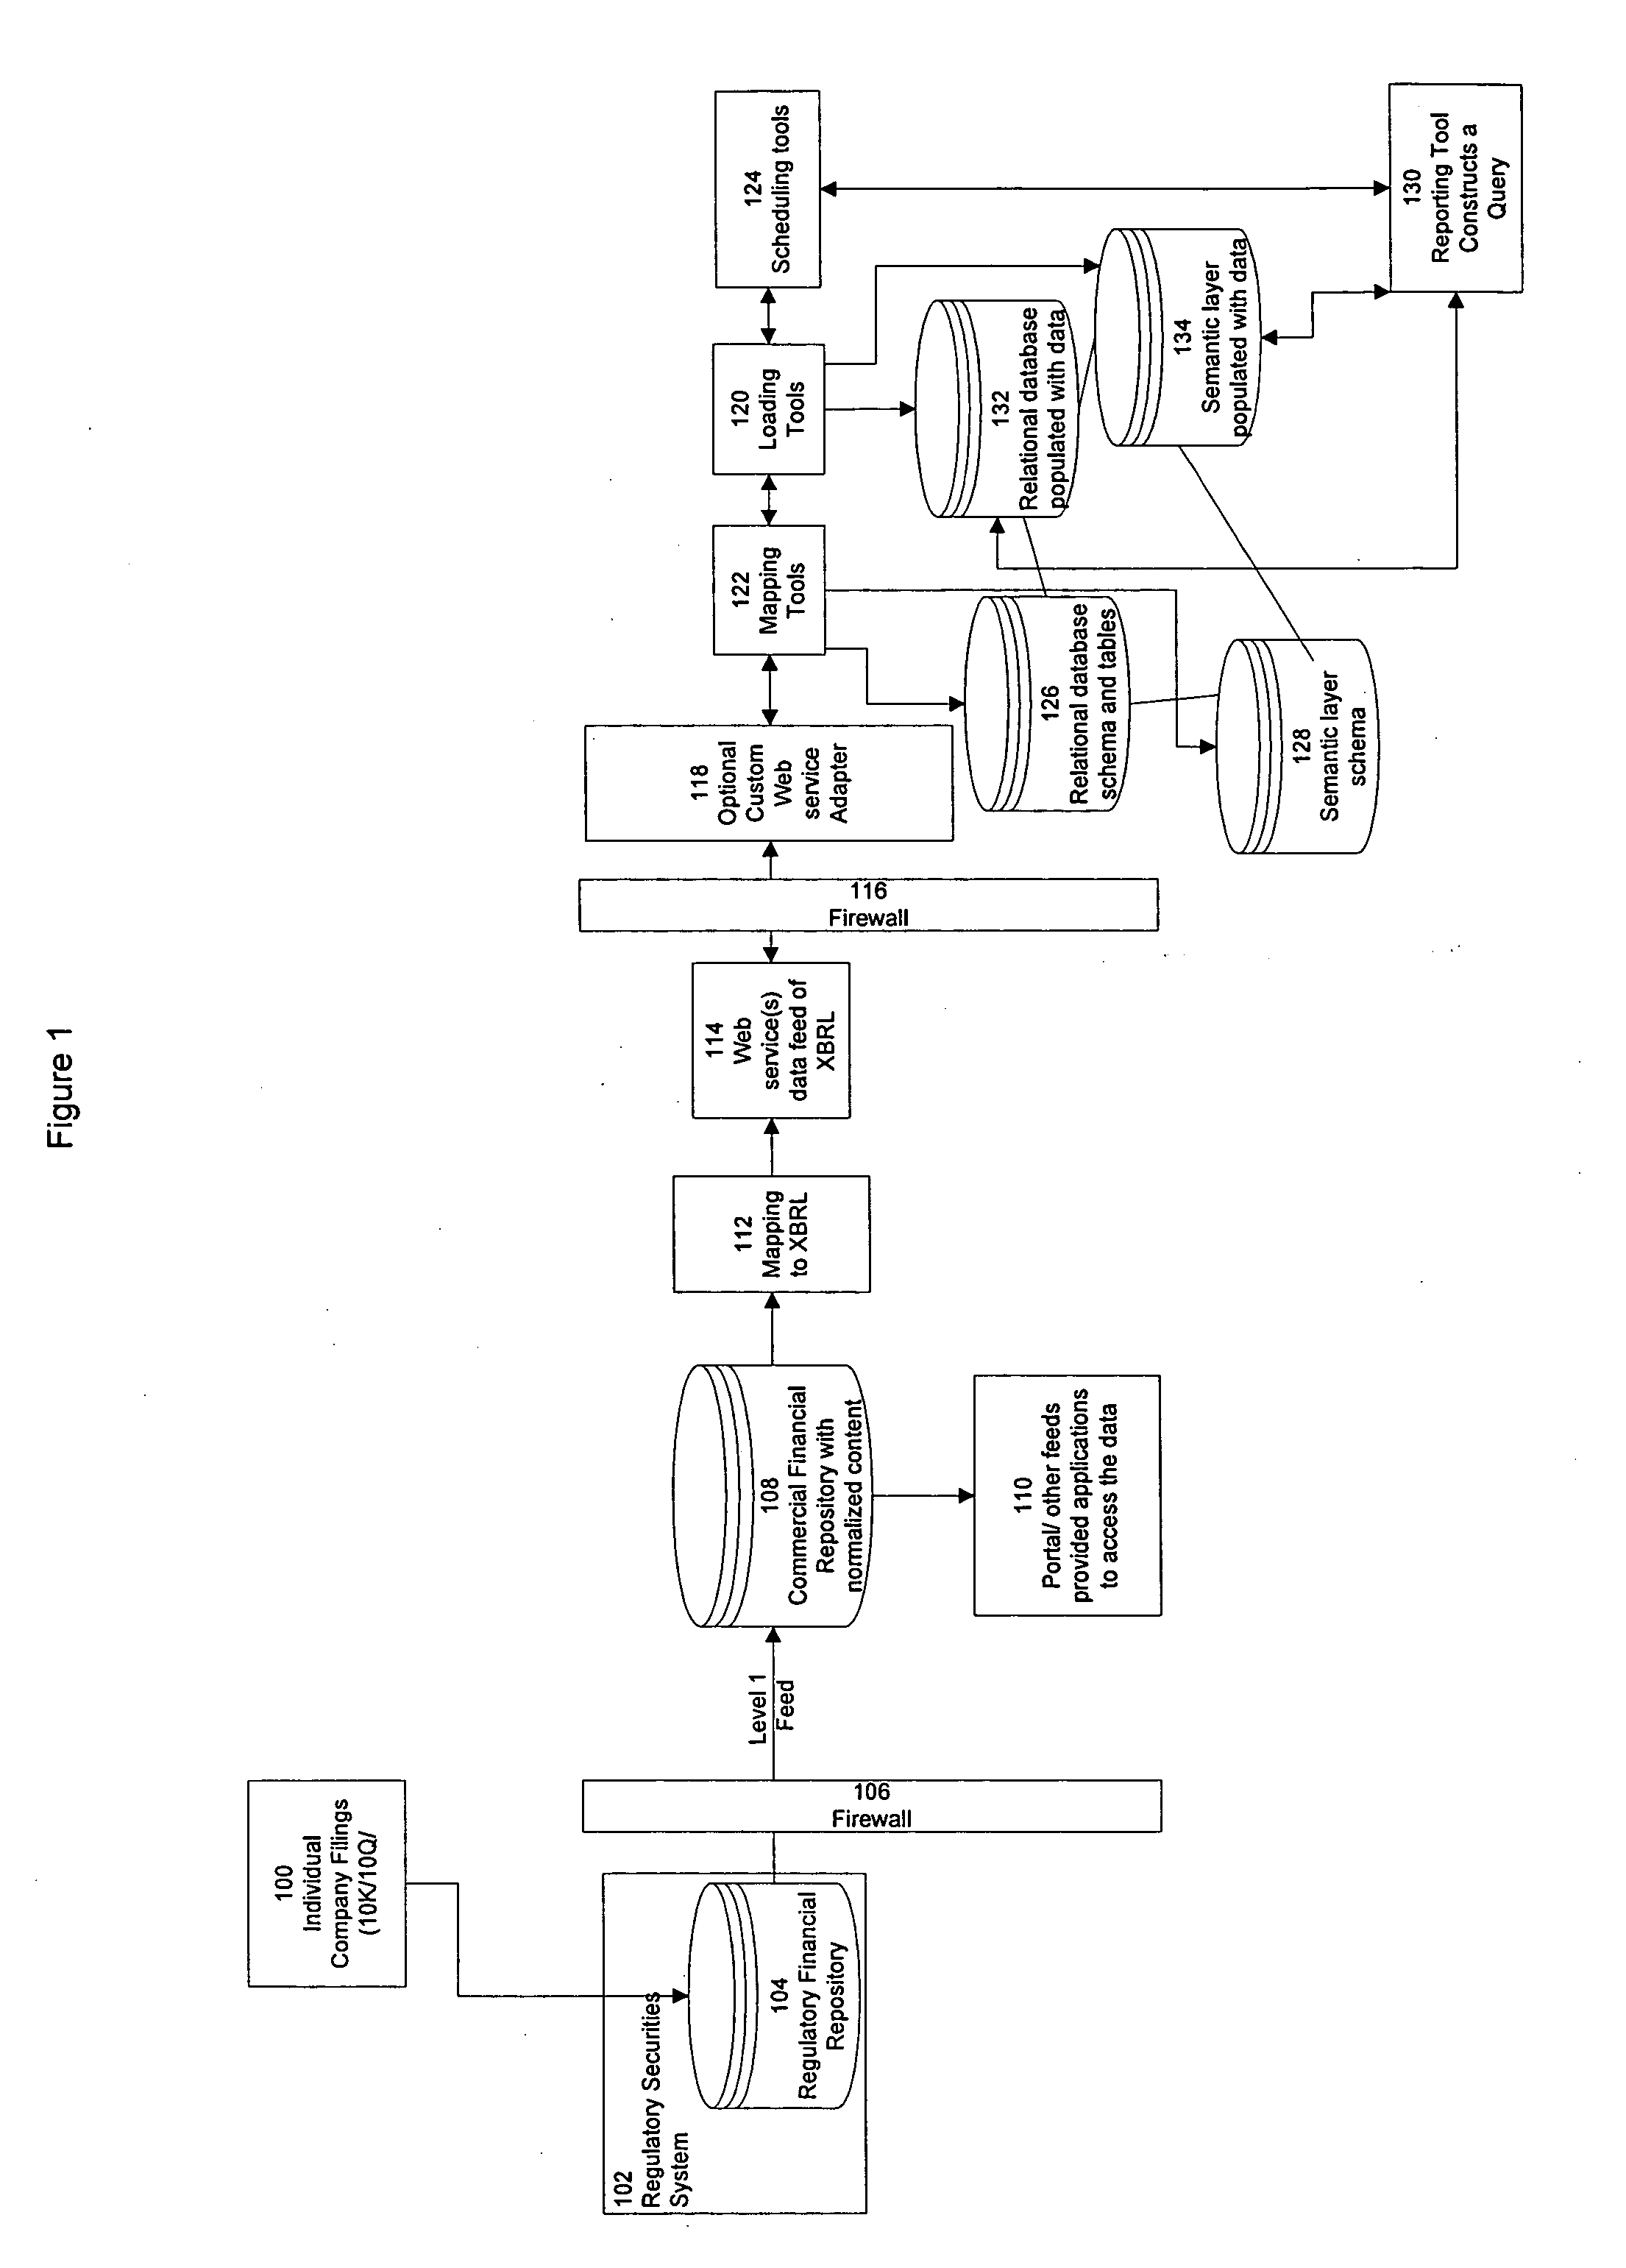 Apparatus and method for transforming XBRL data into database schema